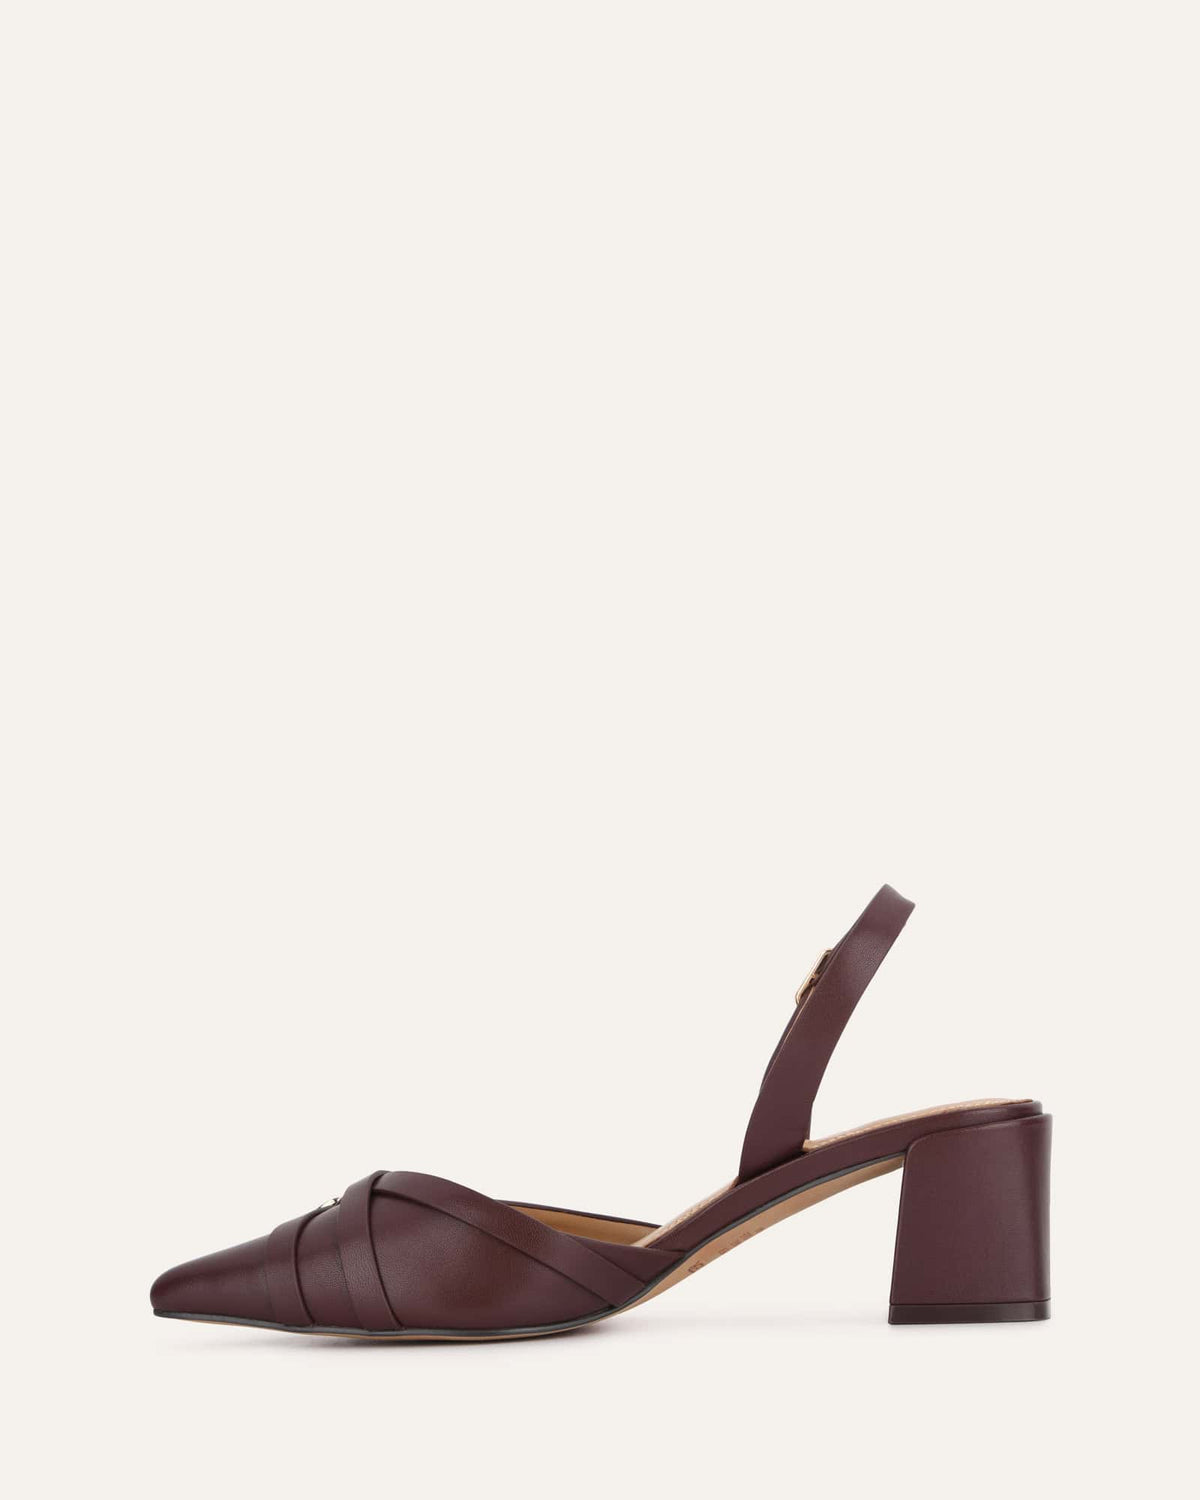 COBY LOW HEELS COCOA BROWN LEATHER